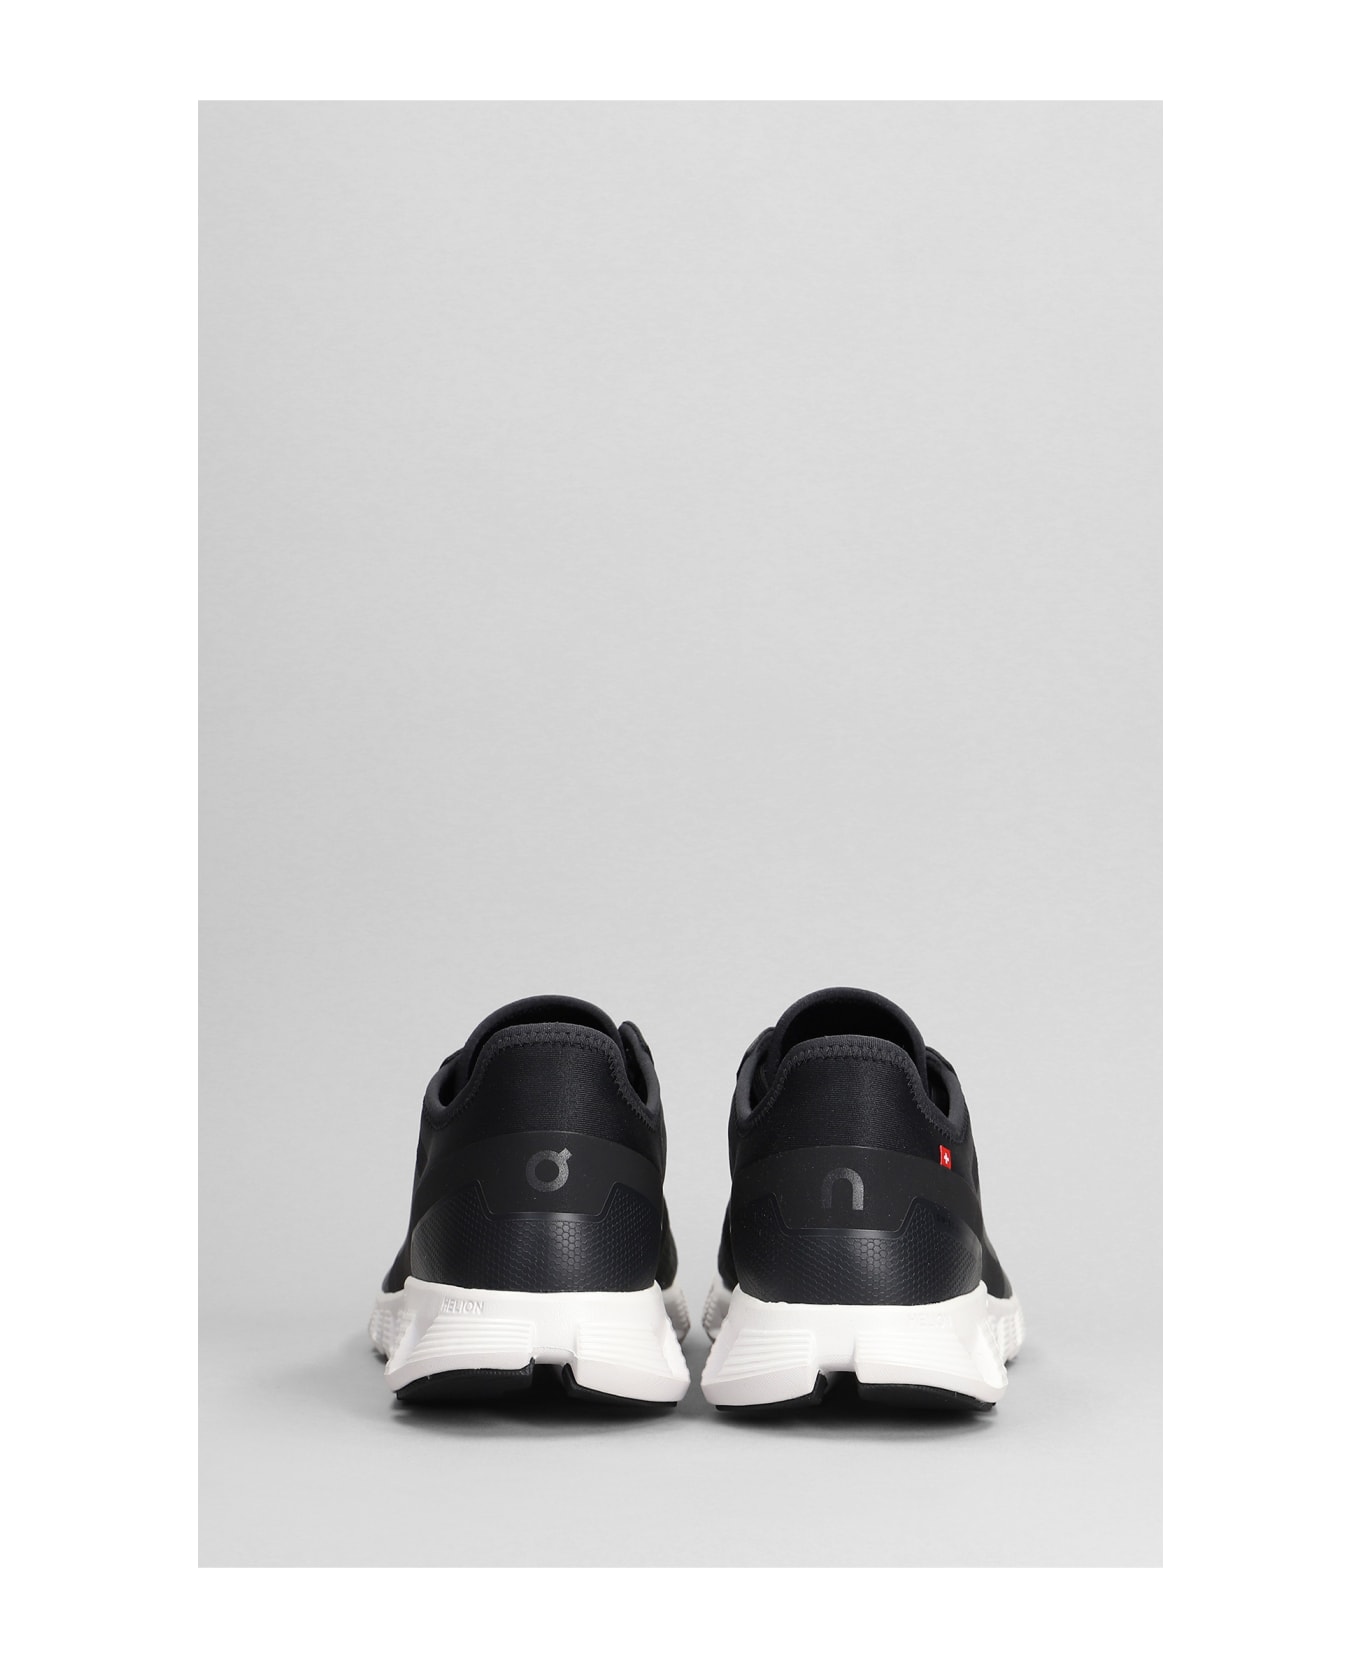 ON Cloud X 3 Ad Sneakers In Black Polyester - black